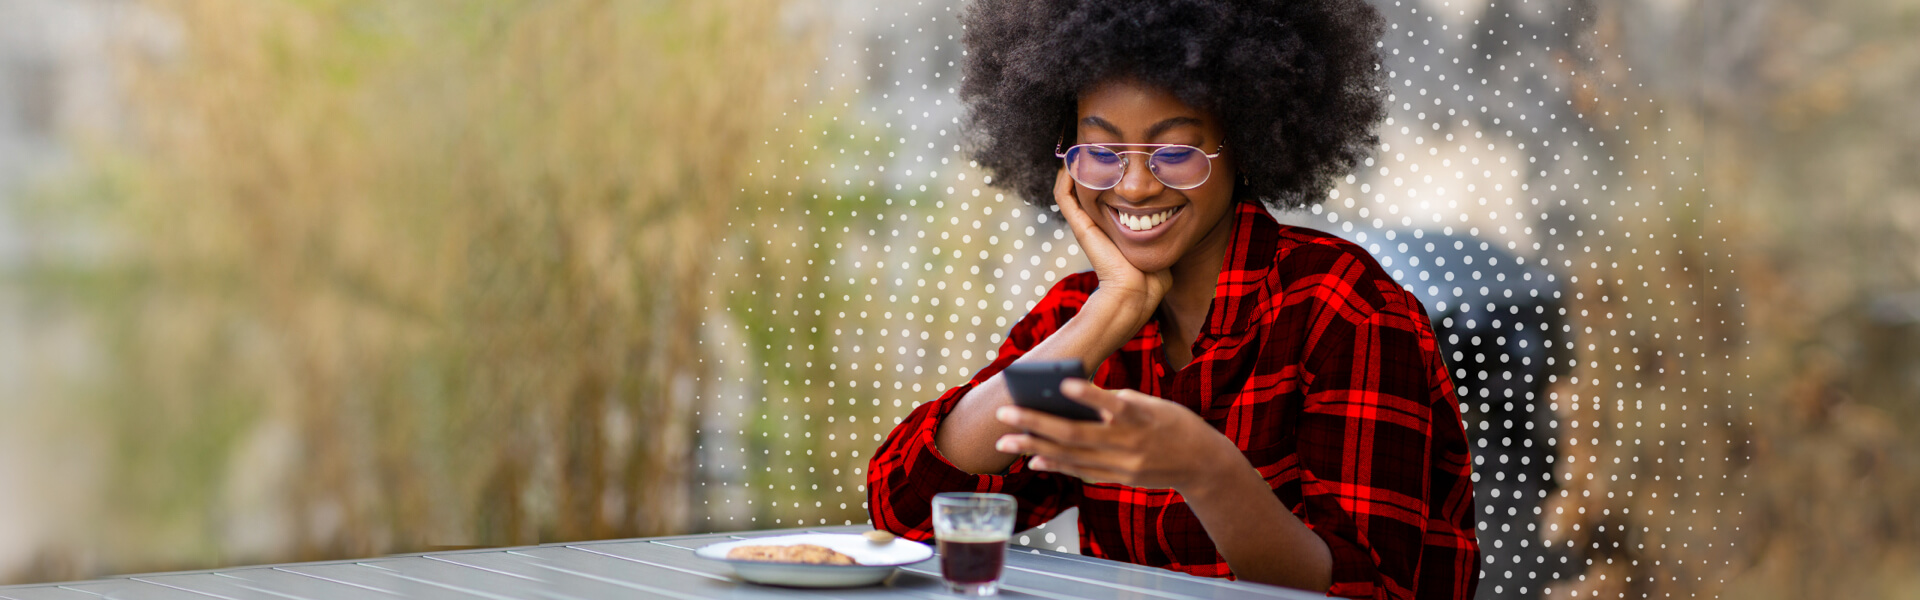 A young woman sitting at an outdoor table looks pleased by something she just took care of doing, using her smart phone.